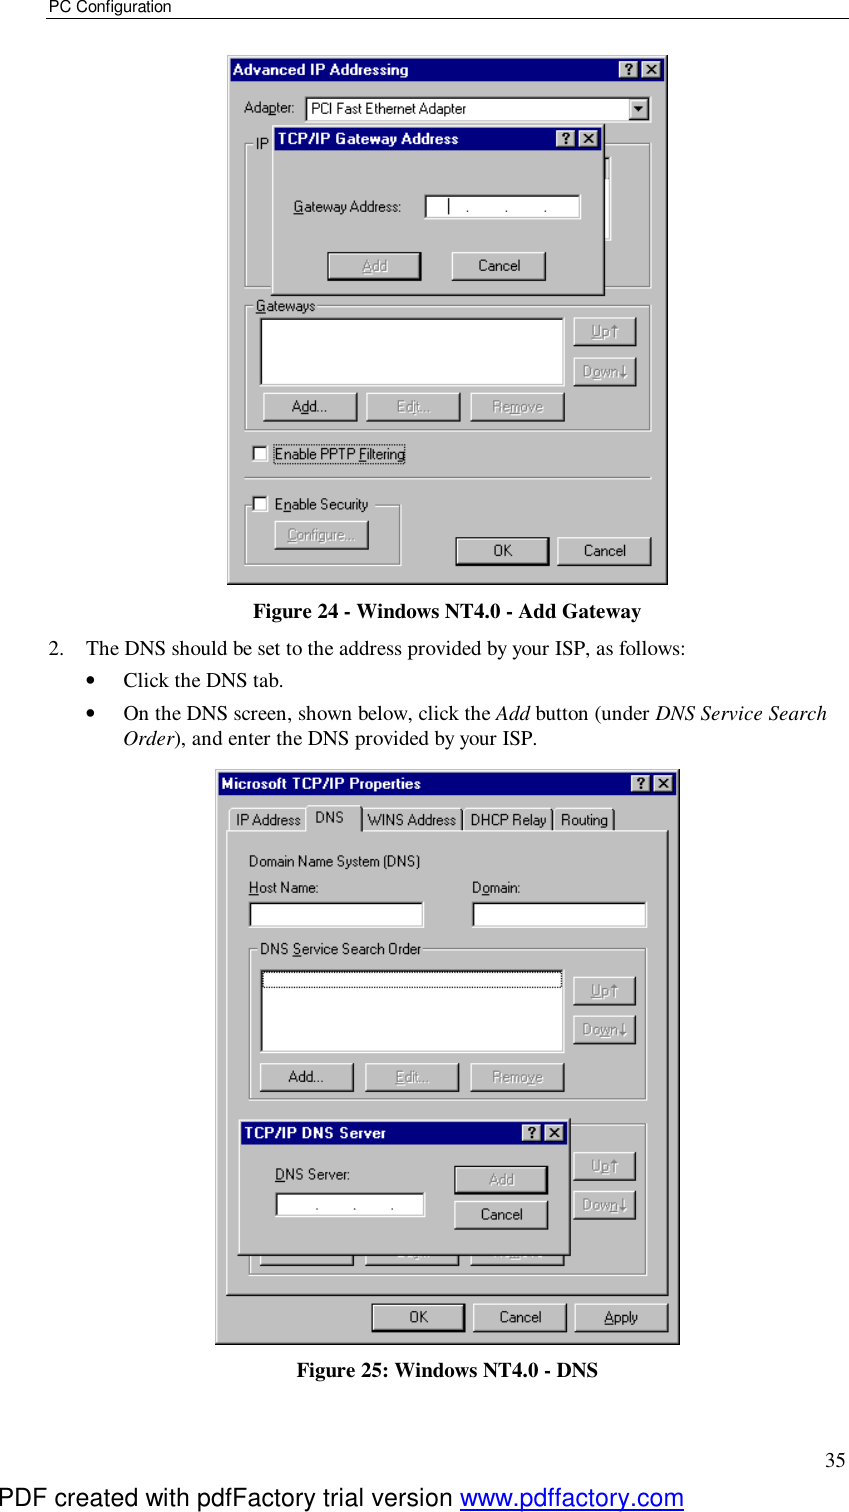 PC Configuration 35  Figure 24 - Windows NT4.0 - Add Gateway 2. The DNS should be set to the address provided by your ISP, as follows: •  Click the DNS tab. •  On the DNS screen, shown below, click the Add button (under DNS Service Search Order), and enter the DNS provided by your ISP.  Figure 25: Windows NT4.0 - DNS PDF created with pdfFactory trial version www.pdffactory.com